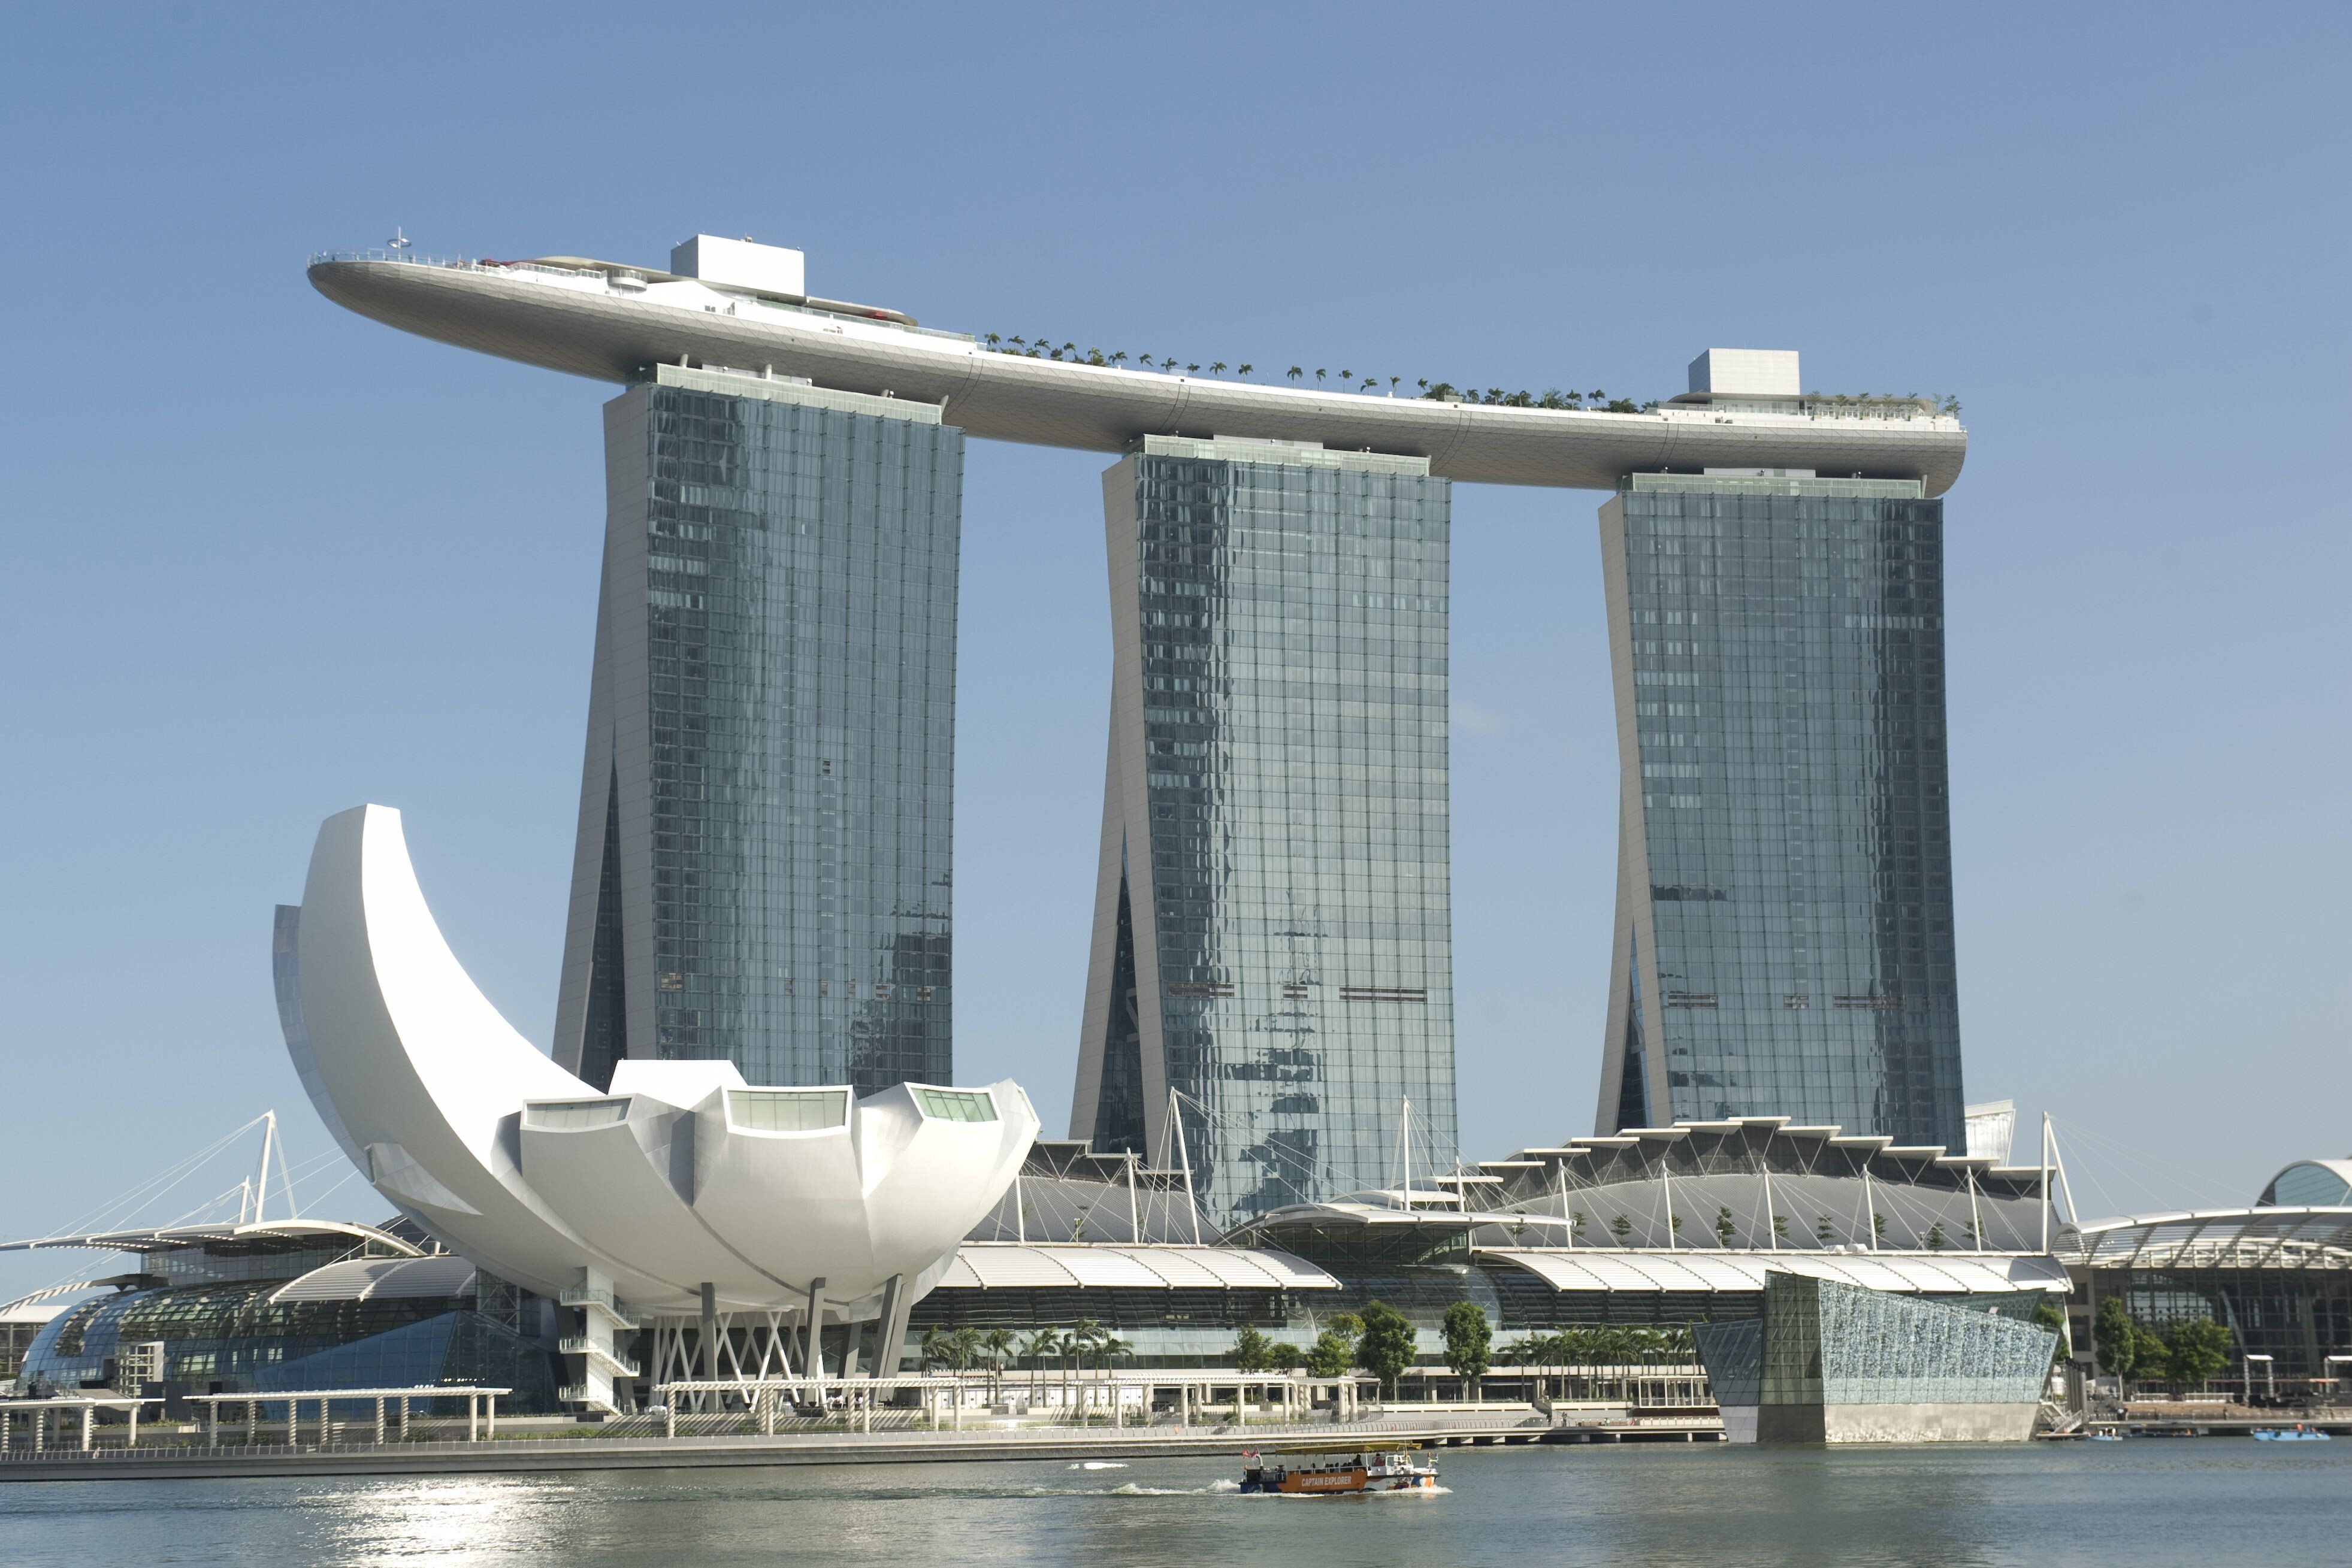 Singapore's Marina Bay Sands casino, owned by US billionaire